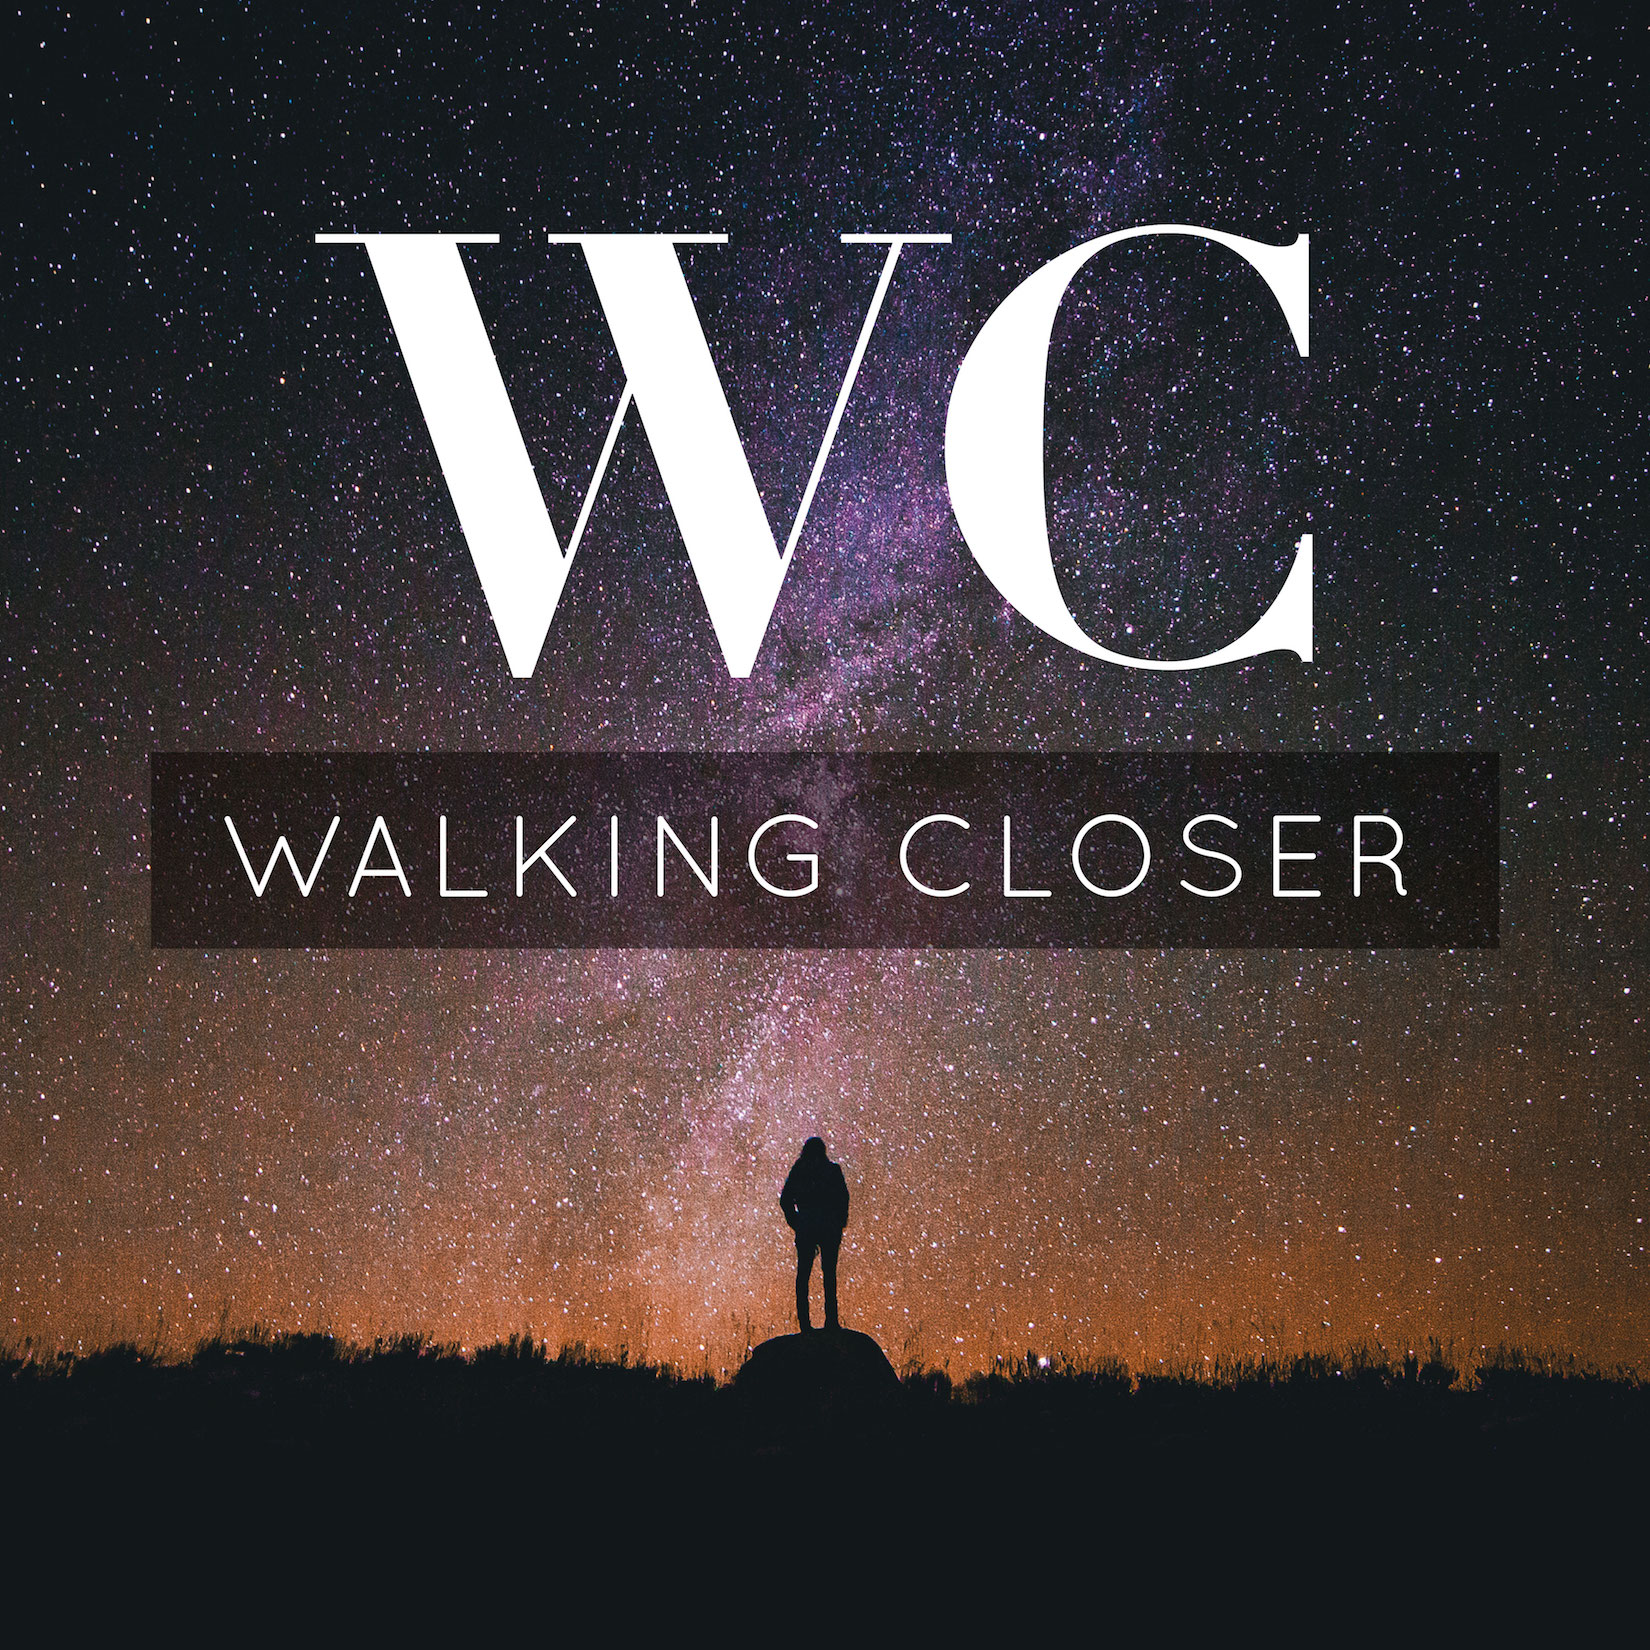 Episode 1 "Introduction to The Walking Closer Podcast"